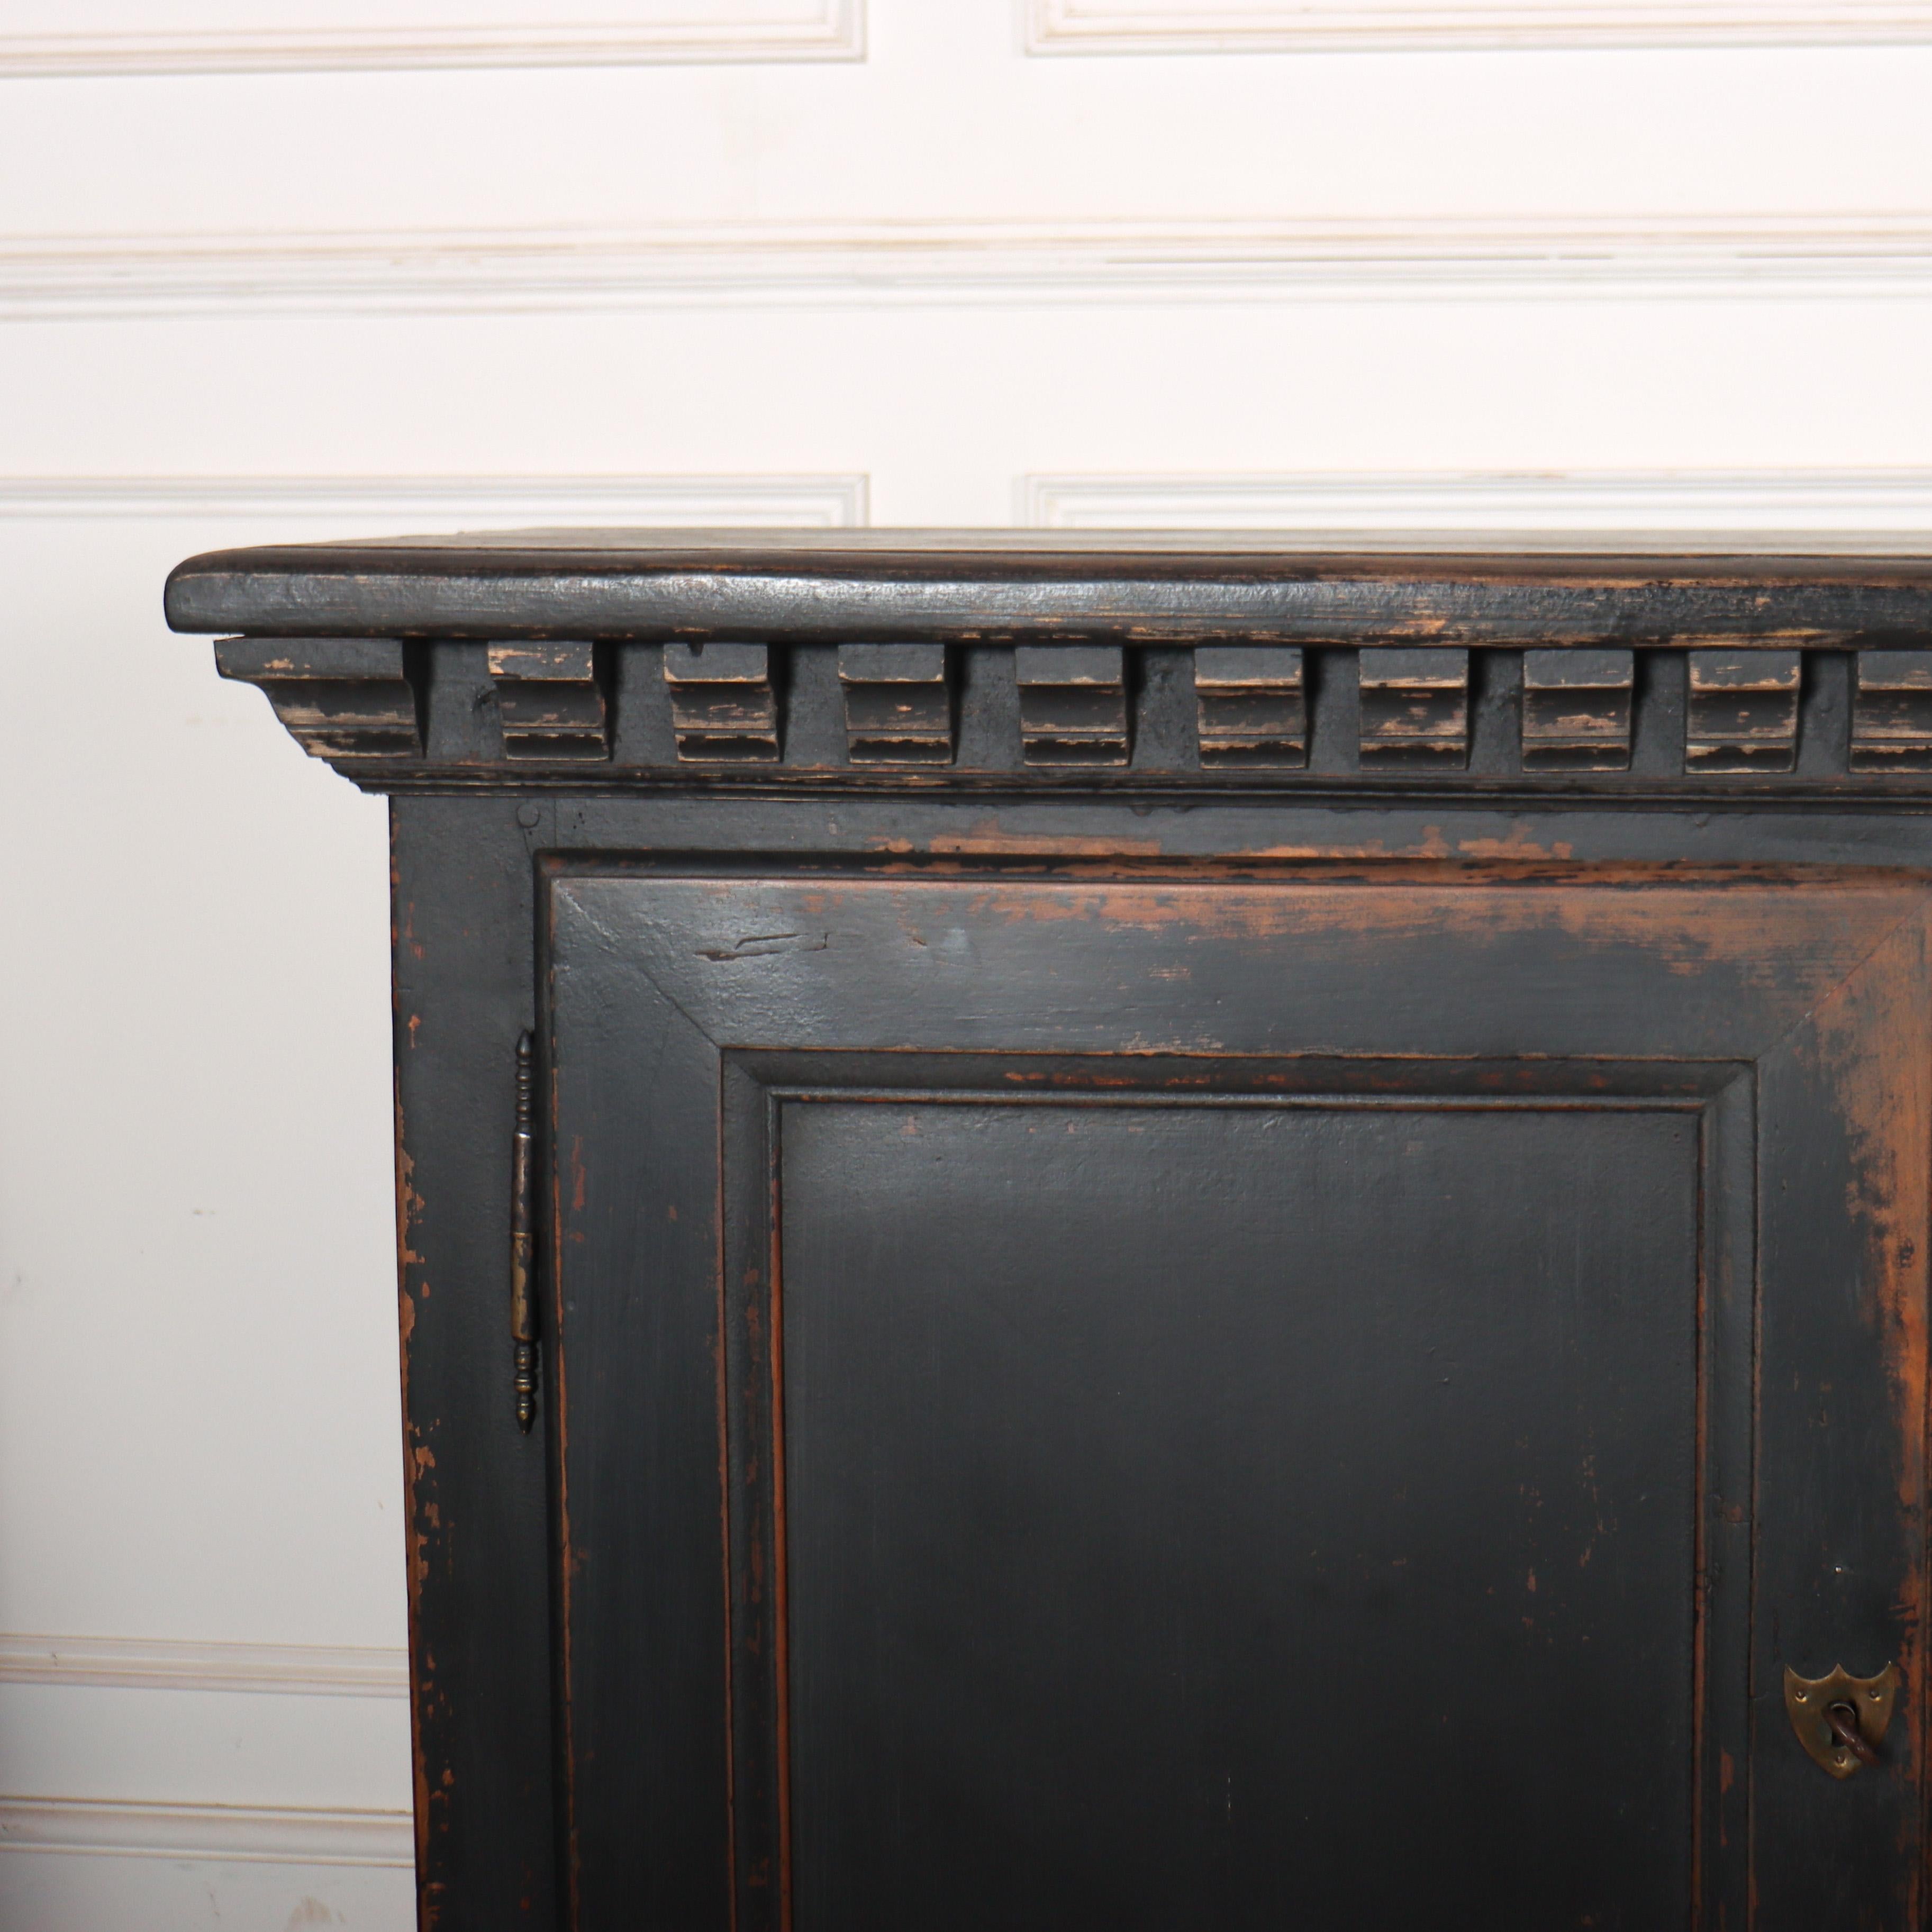 Late 18th C four door Italian enfilade with an old black paint finish. 1790.

Reference: 8318

Dimensions
104.5 inches (265 cms) Wide
23.5 inches (60 cms) Deep
40.5 inches (103 cms) High